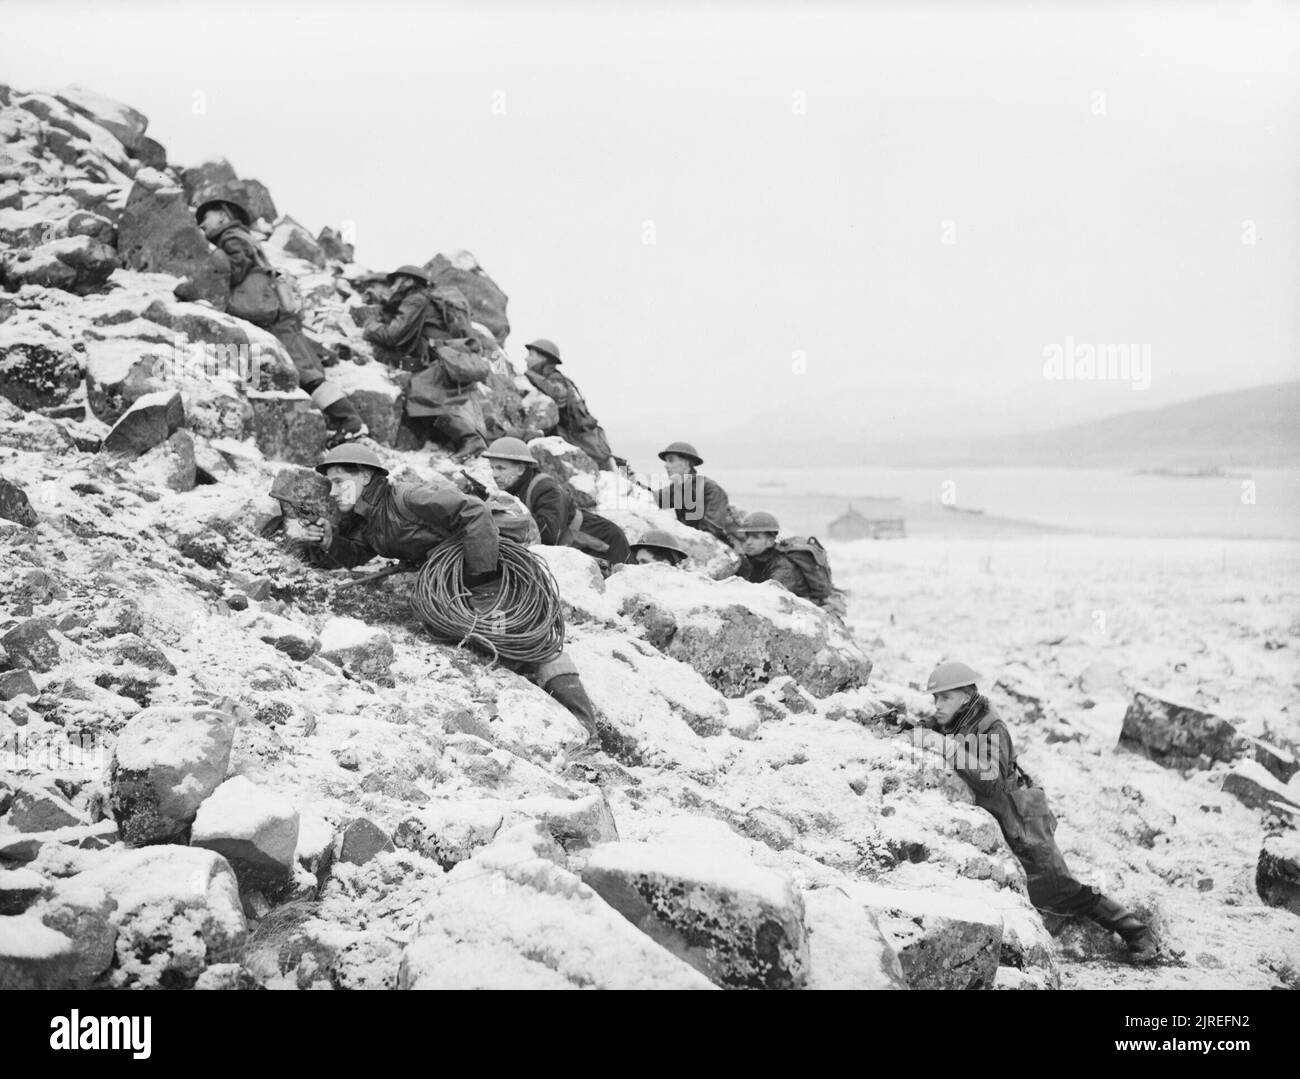 Sailors carrying cable, telephone wires and explosives up a hillside during demolition training training at Hvalfjord in Iceland, 1942. On a snow covered hillside ratings are covering their comrades as they carry cable, telephone wires and explosives to a selected objective during training at Hvalfjord, Iceland. These sailors are undergoing training for demolition work, wherein they are shown how to prepare charges and detonators for the destruction of enemy property and defences, as they would in a landing in enemy occupied country. The men are led by specially trained officers who teach them Stock Photo